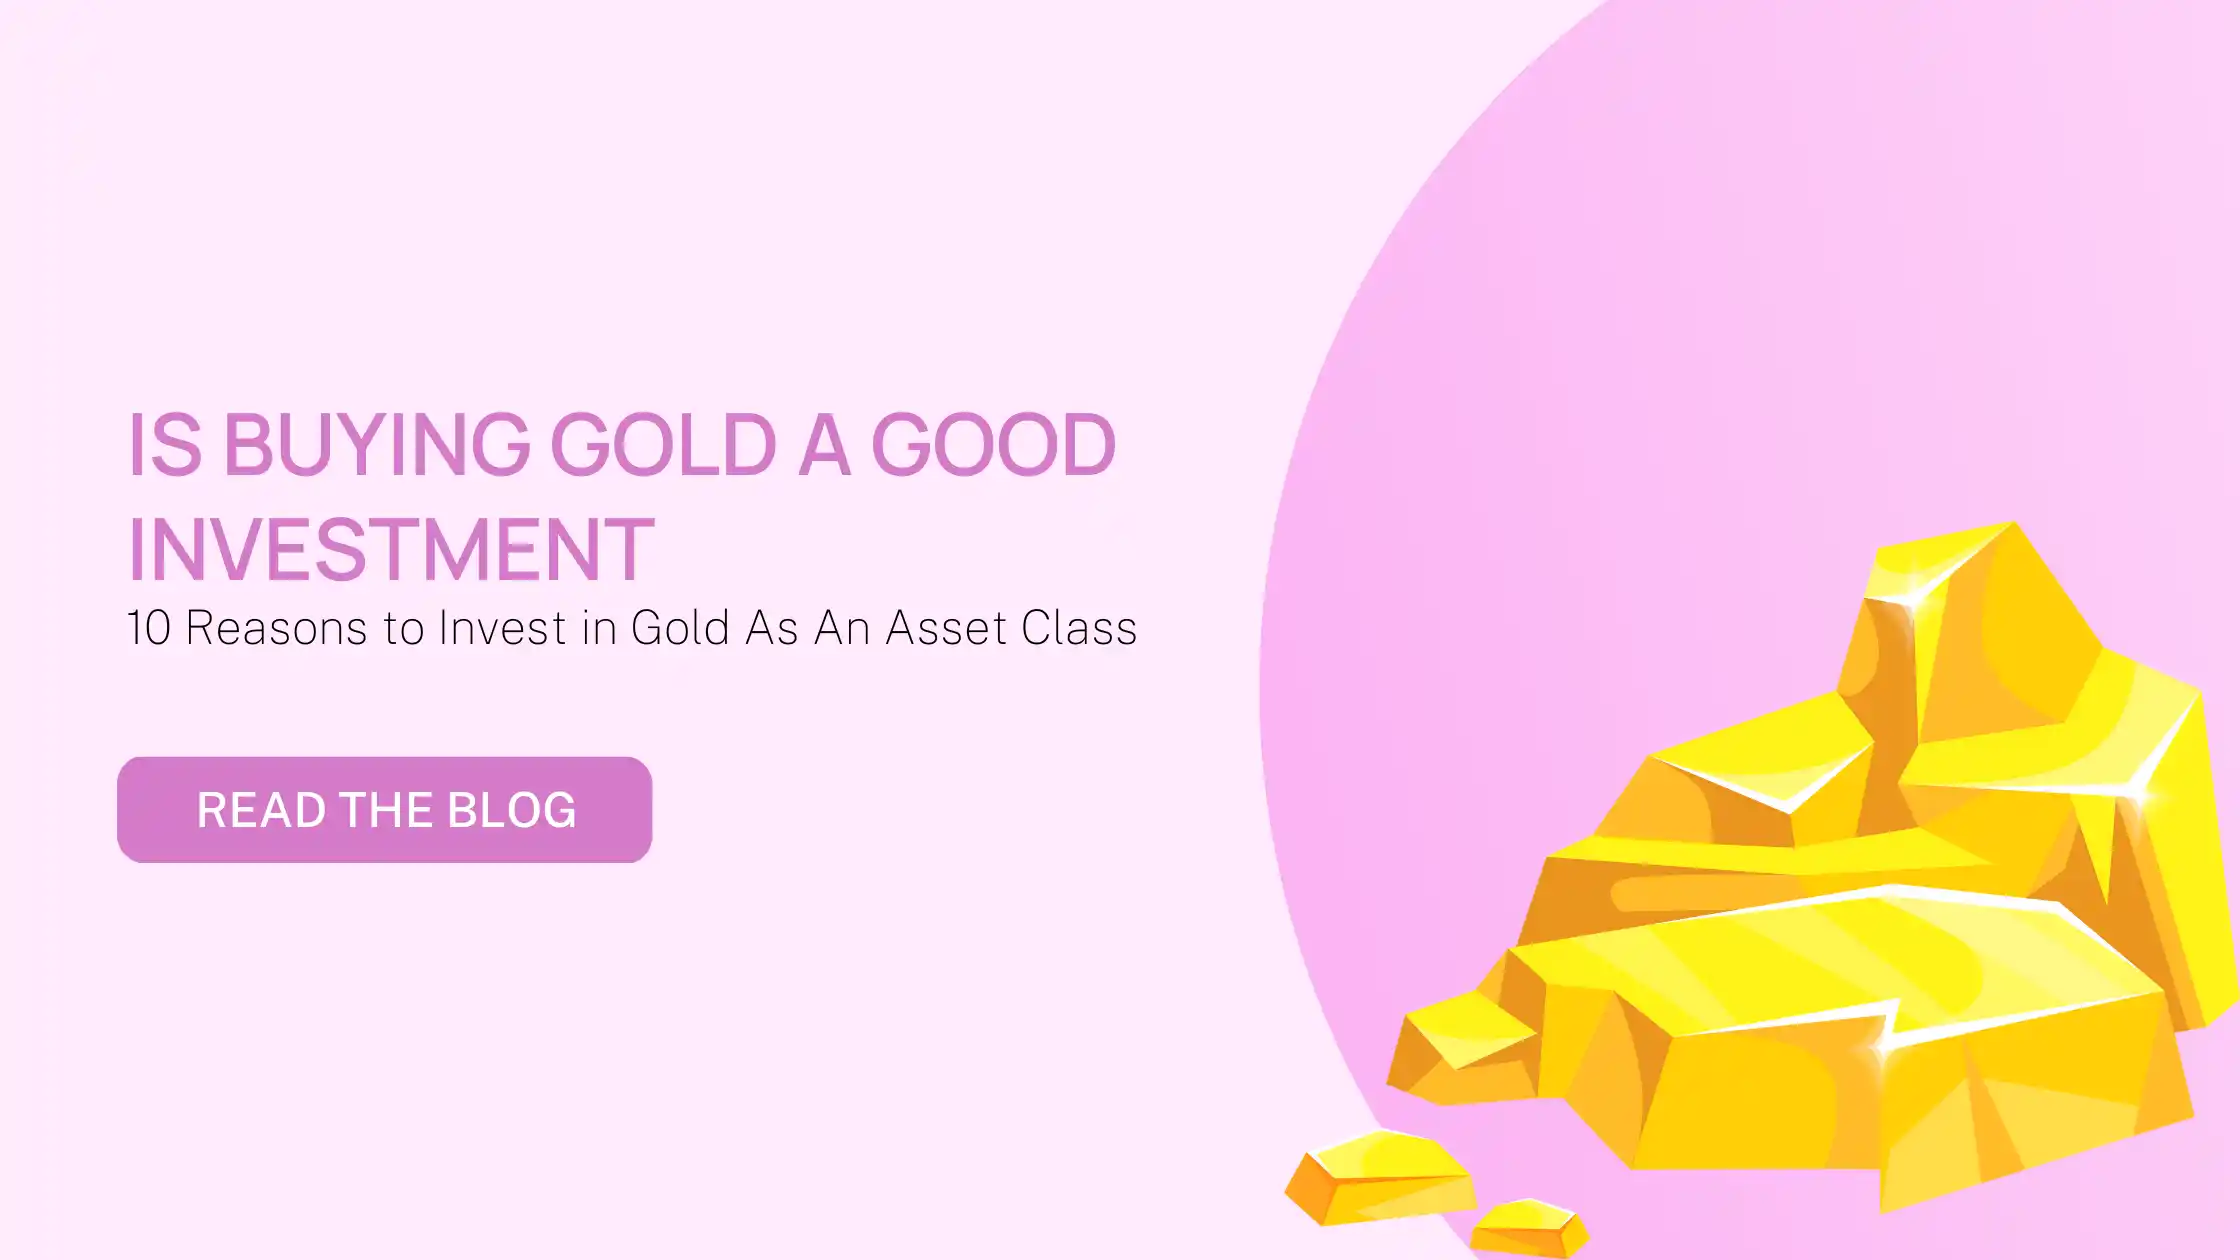 Is Buying Gold a Good Investment - 10 Reasons to Invest